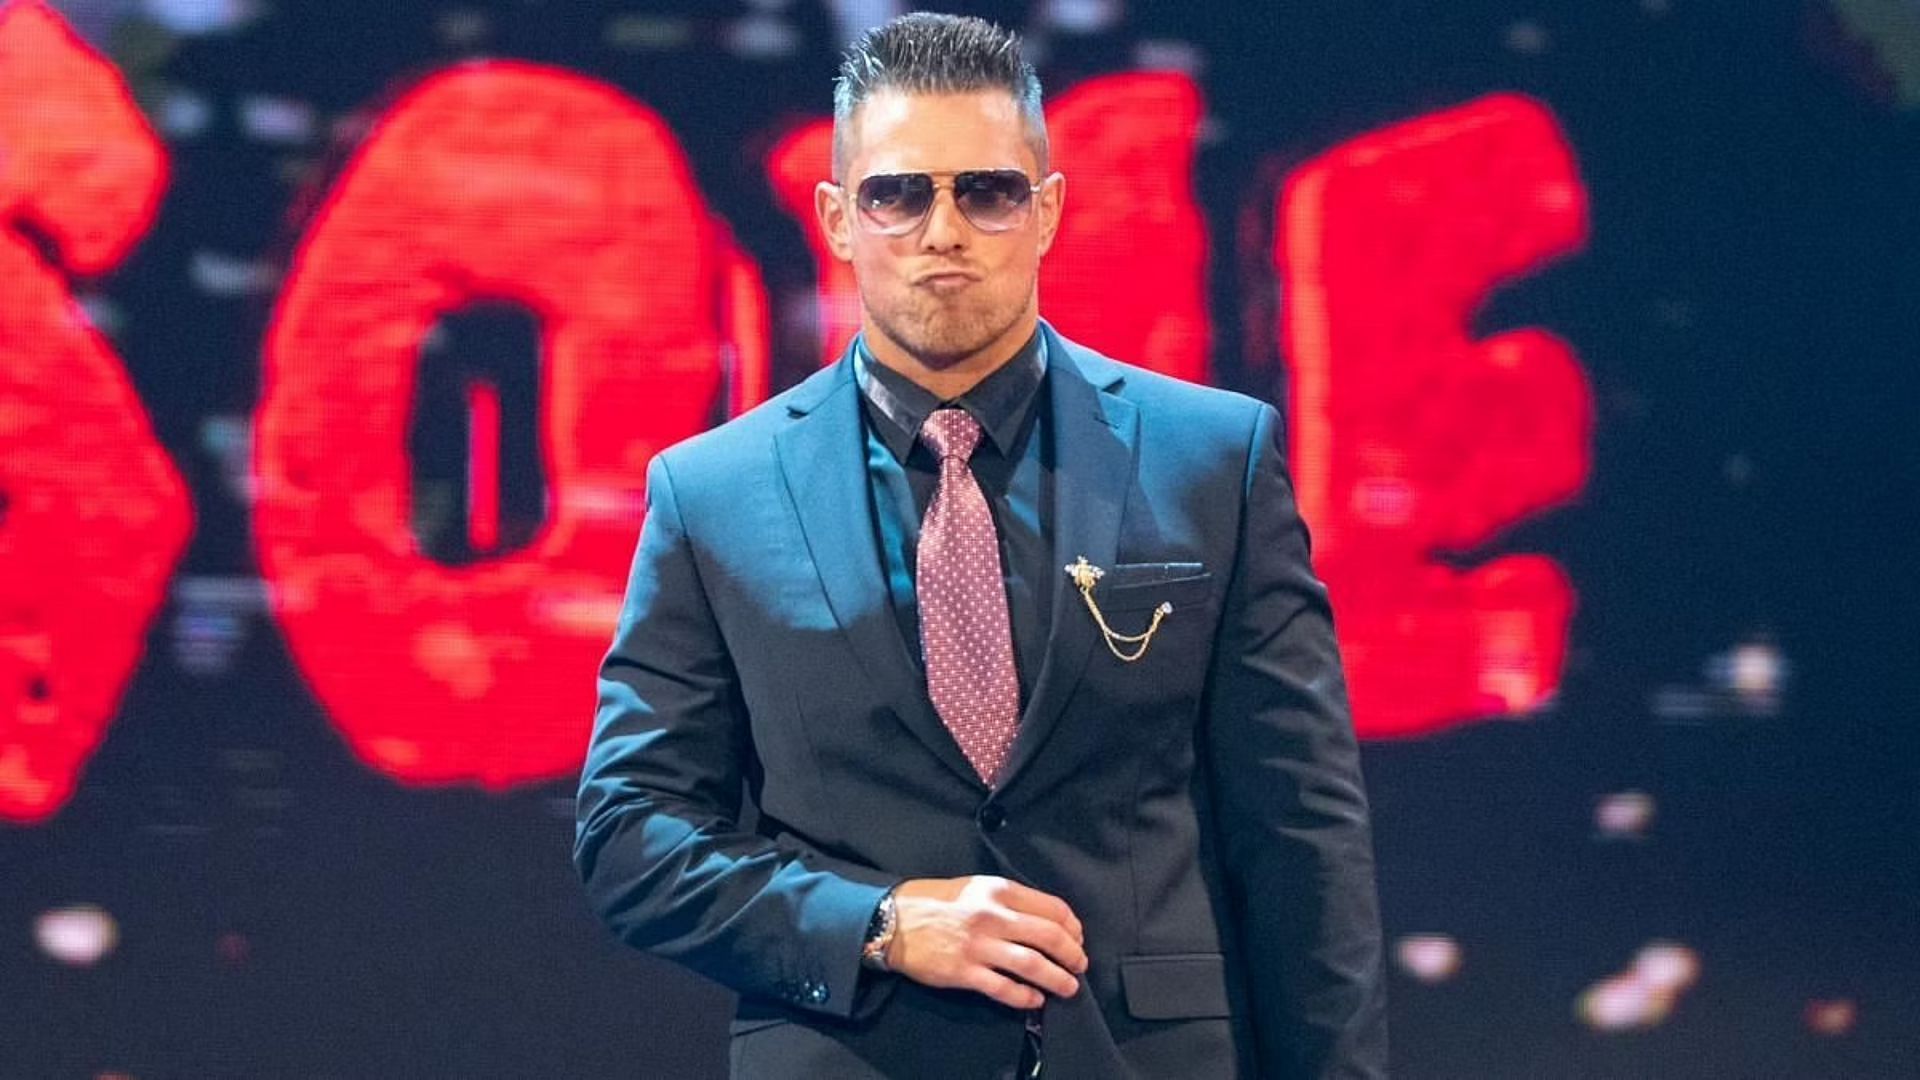 The Miz has got some thoughts on his WrestleMania partner